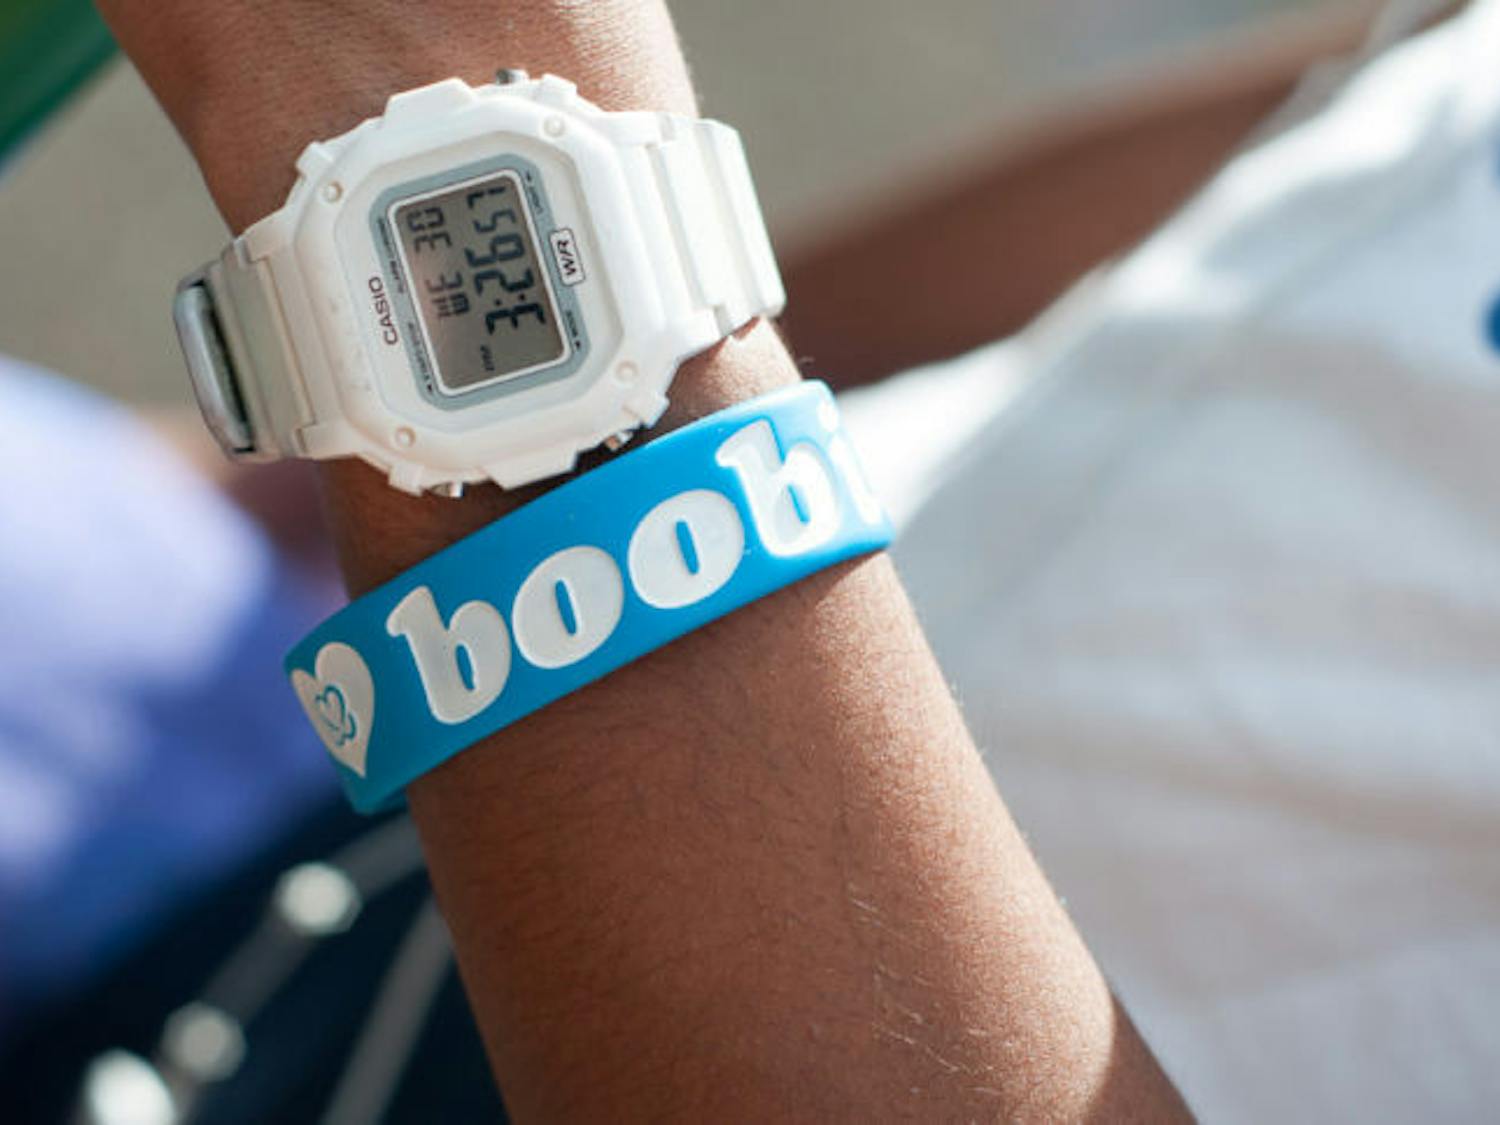 A battle concerning the popular, but controversial “I Heart Boobies” bracelets could potentially make it to the U.S. Supreme Court. Two Pennsylvania high school students petitioned against their school’s ban against the bracelets, arguing the bracelets promote breast cancer awareness among young people.